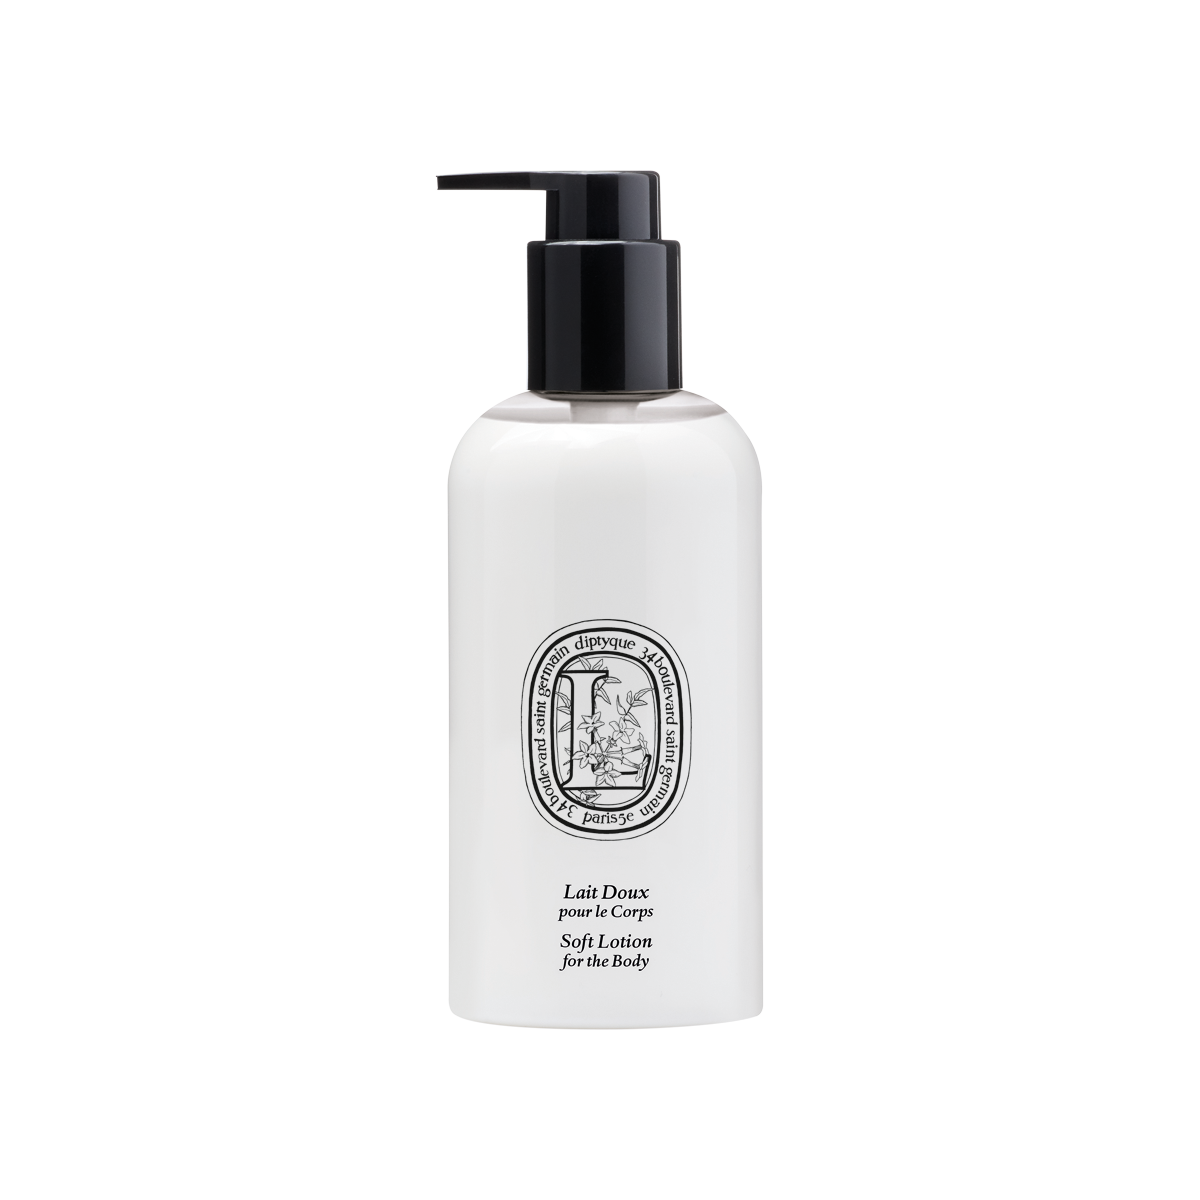 Diptyque - Soft Lotion for the Body